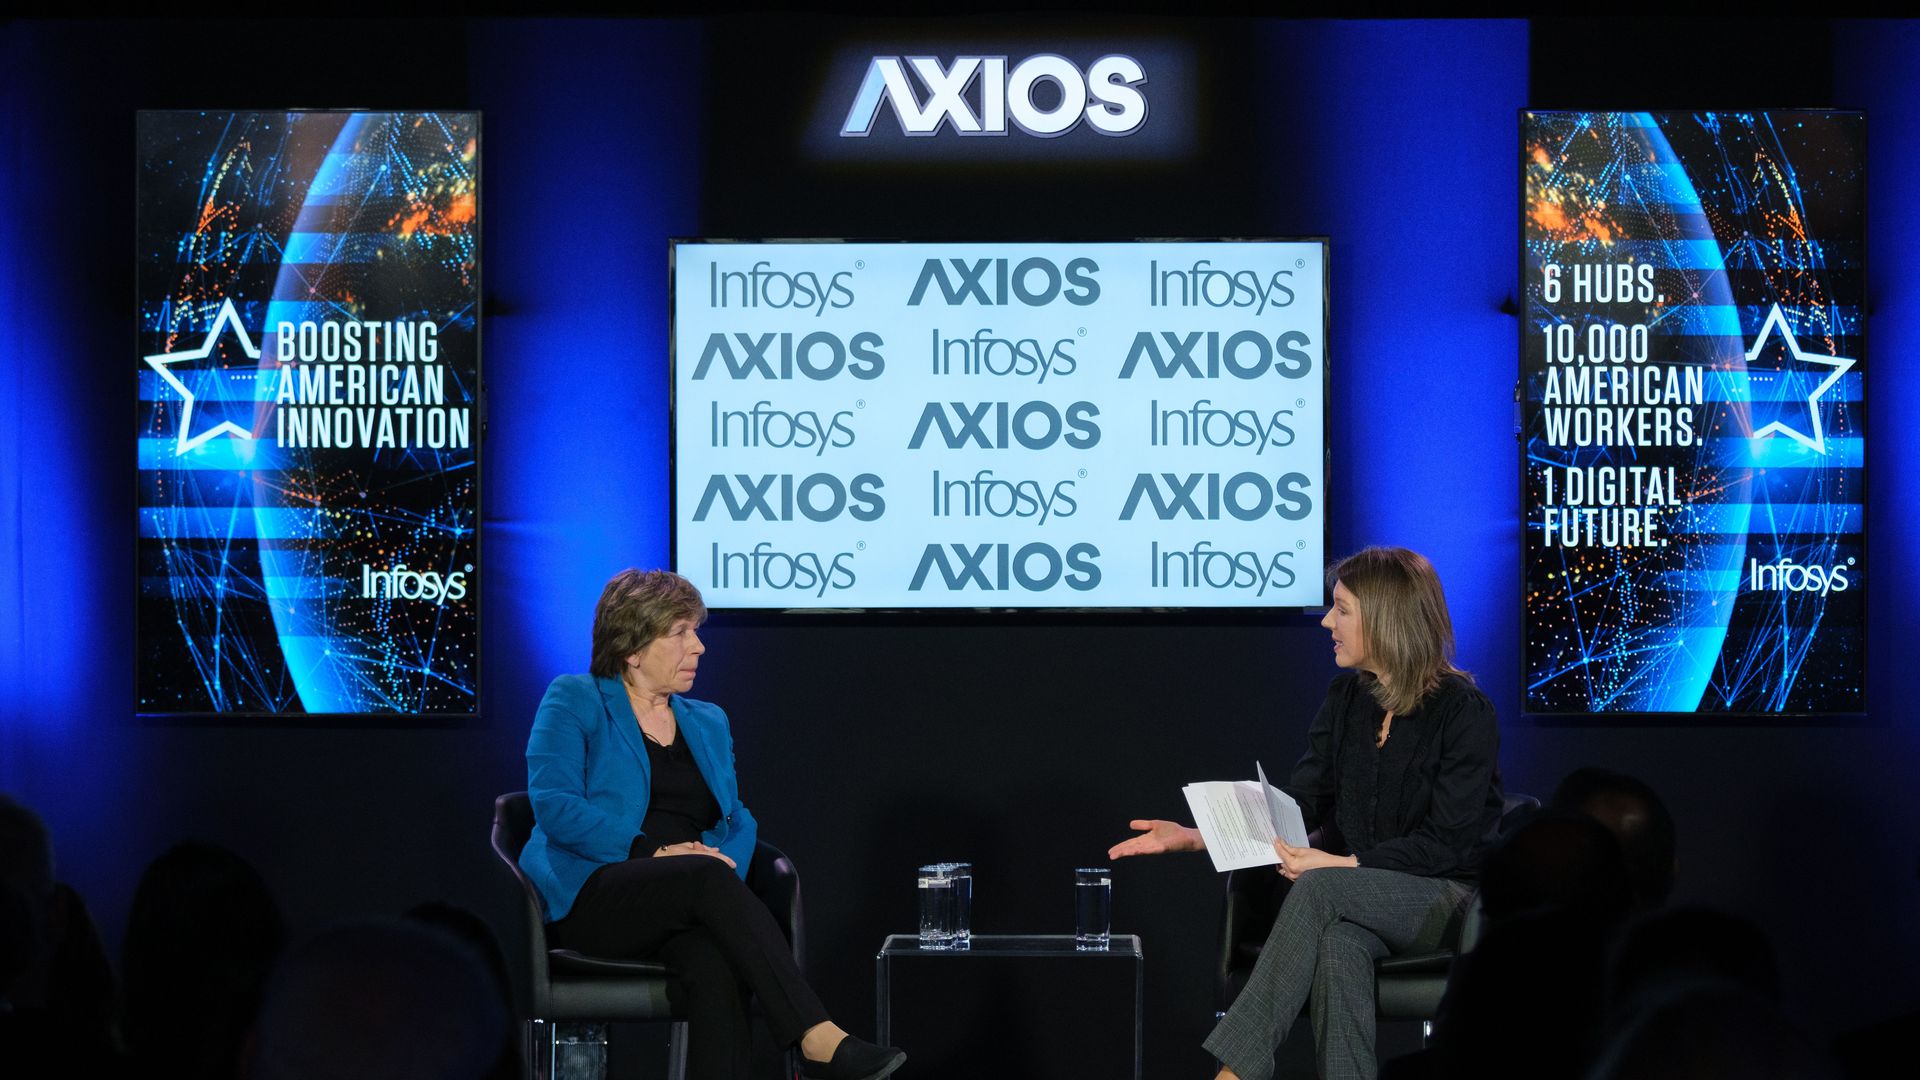 American Federation of Teachers President Randi Weingarten and Axios Managing Editor Kim Hart on the Axios stage